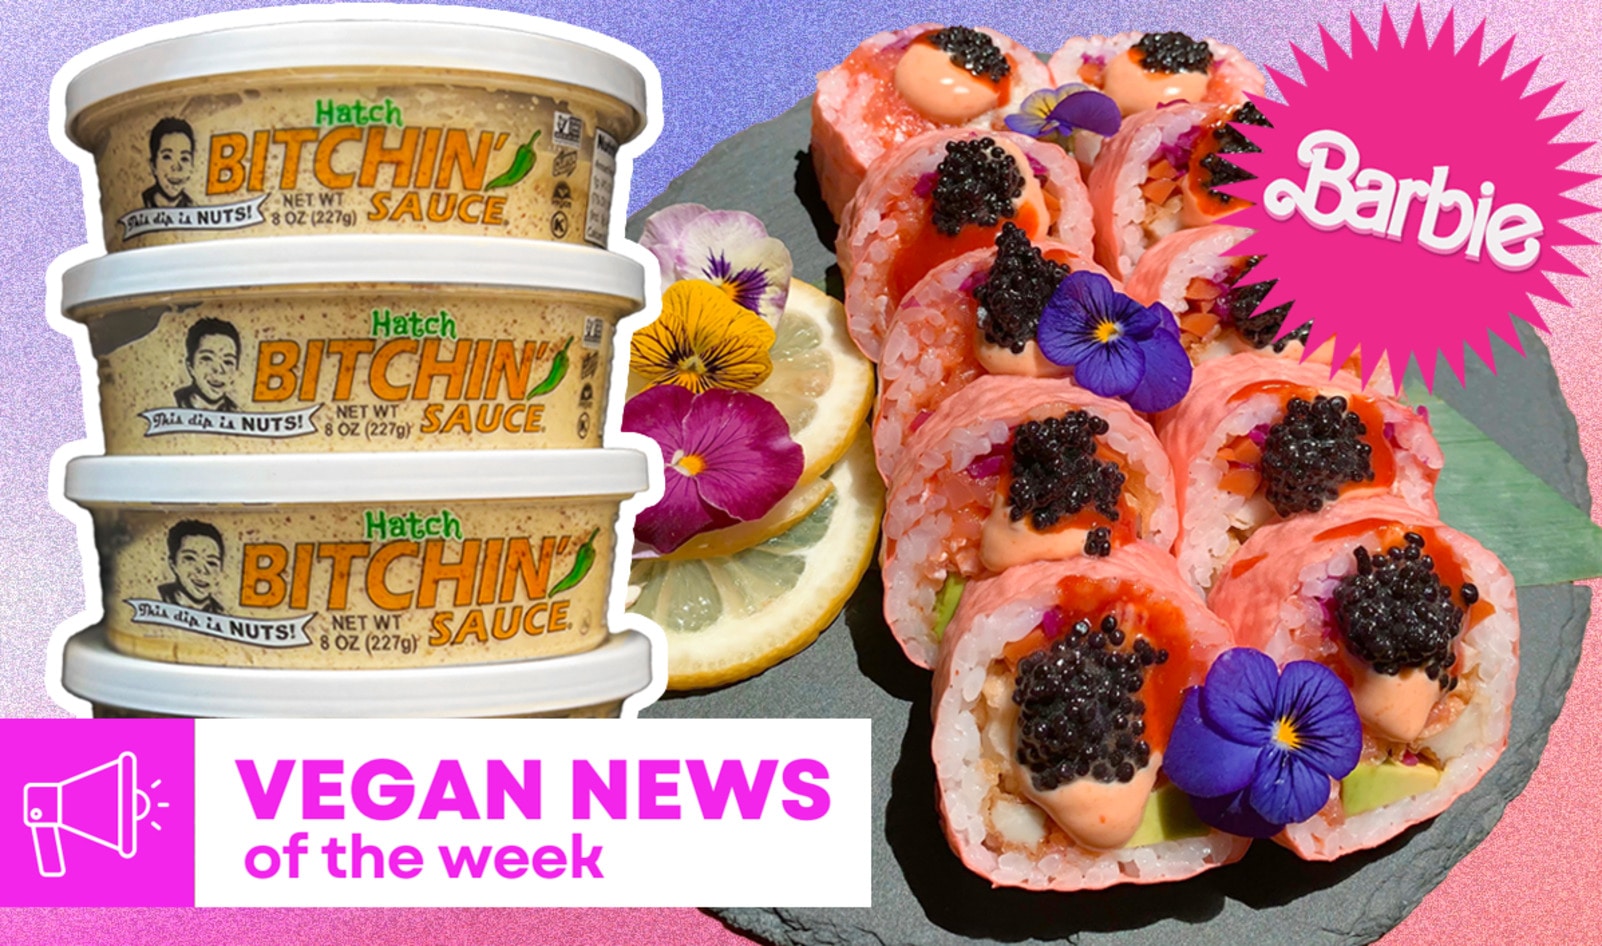 Vegan Food News of the Week: Barbie Sushi Rolls, Hatch Chile Bitchin' Sauce, and More